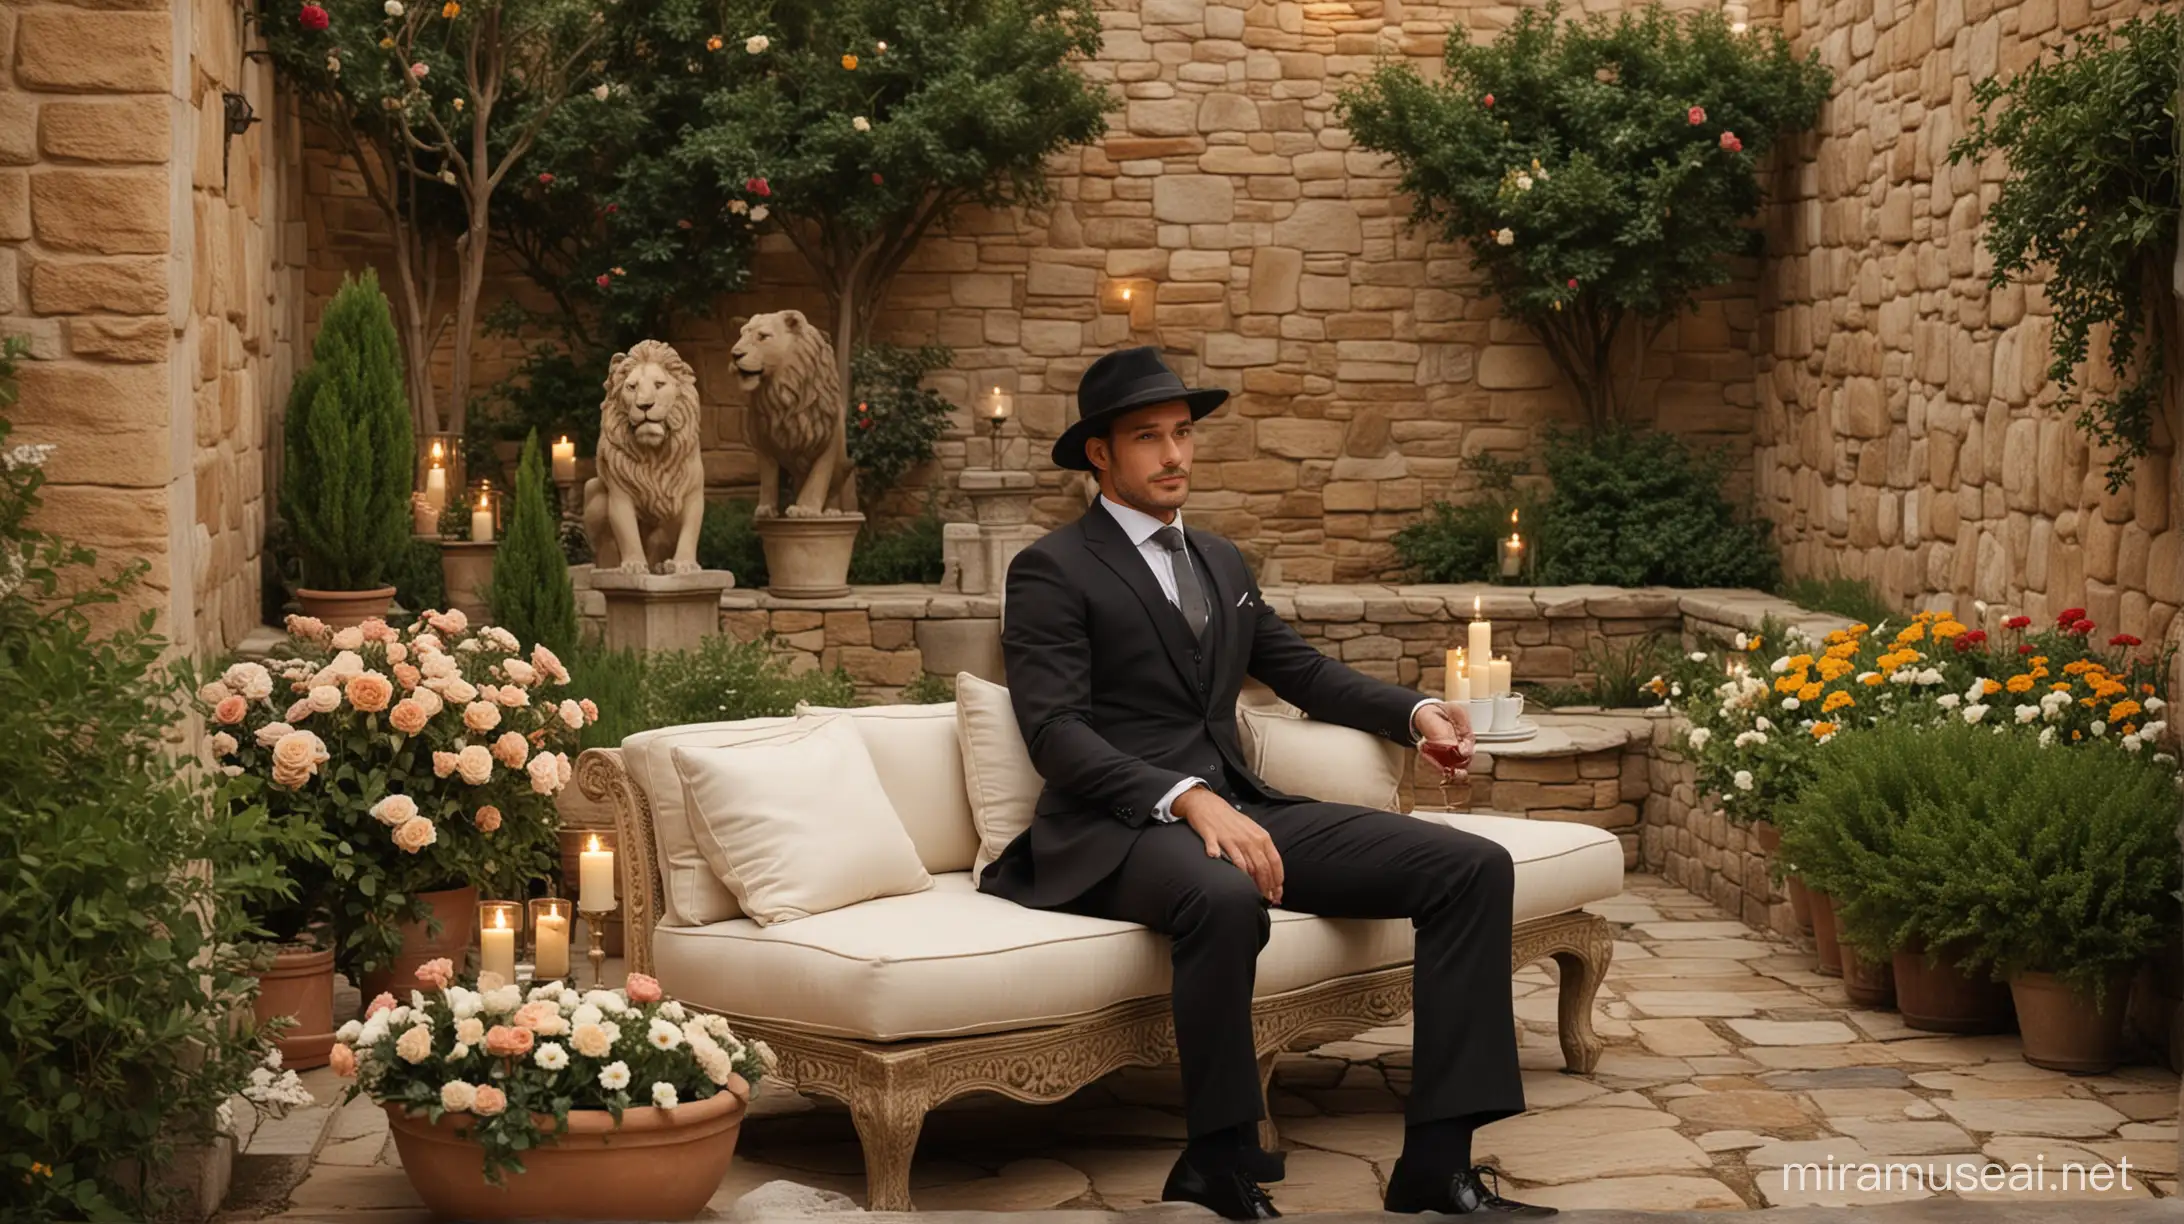 Man in suit, sitting in a luxurious seat of stone, in cushions, in what looks to be an italian setting, like, a backyard, where his yard is like a very big garden, with planted trees here and there, and, also, some cozy lights. He is dressed in a suit, and has a black hat on, where the brim of the hat covers half of his face as he also tilts his head slightly forward. Cozy setting, very romantic and inviting, he is drinking a glass of wine. The hat is longer, like, the brim of the hat is longer. Also, his suit is beige, like the background of the wall. It is darker outside, and, more candles, more, flowers, more bushes, and trees, some statues, of lions, next to his seating. 